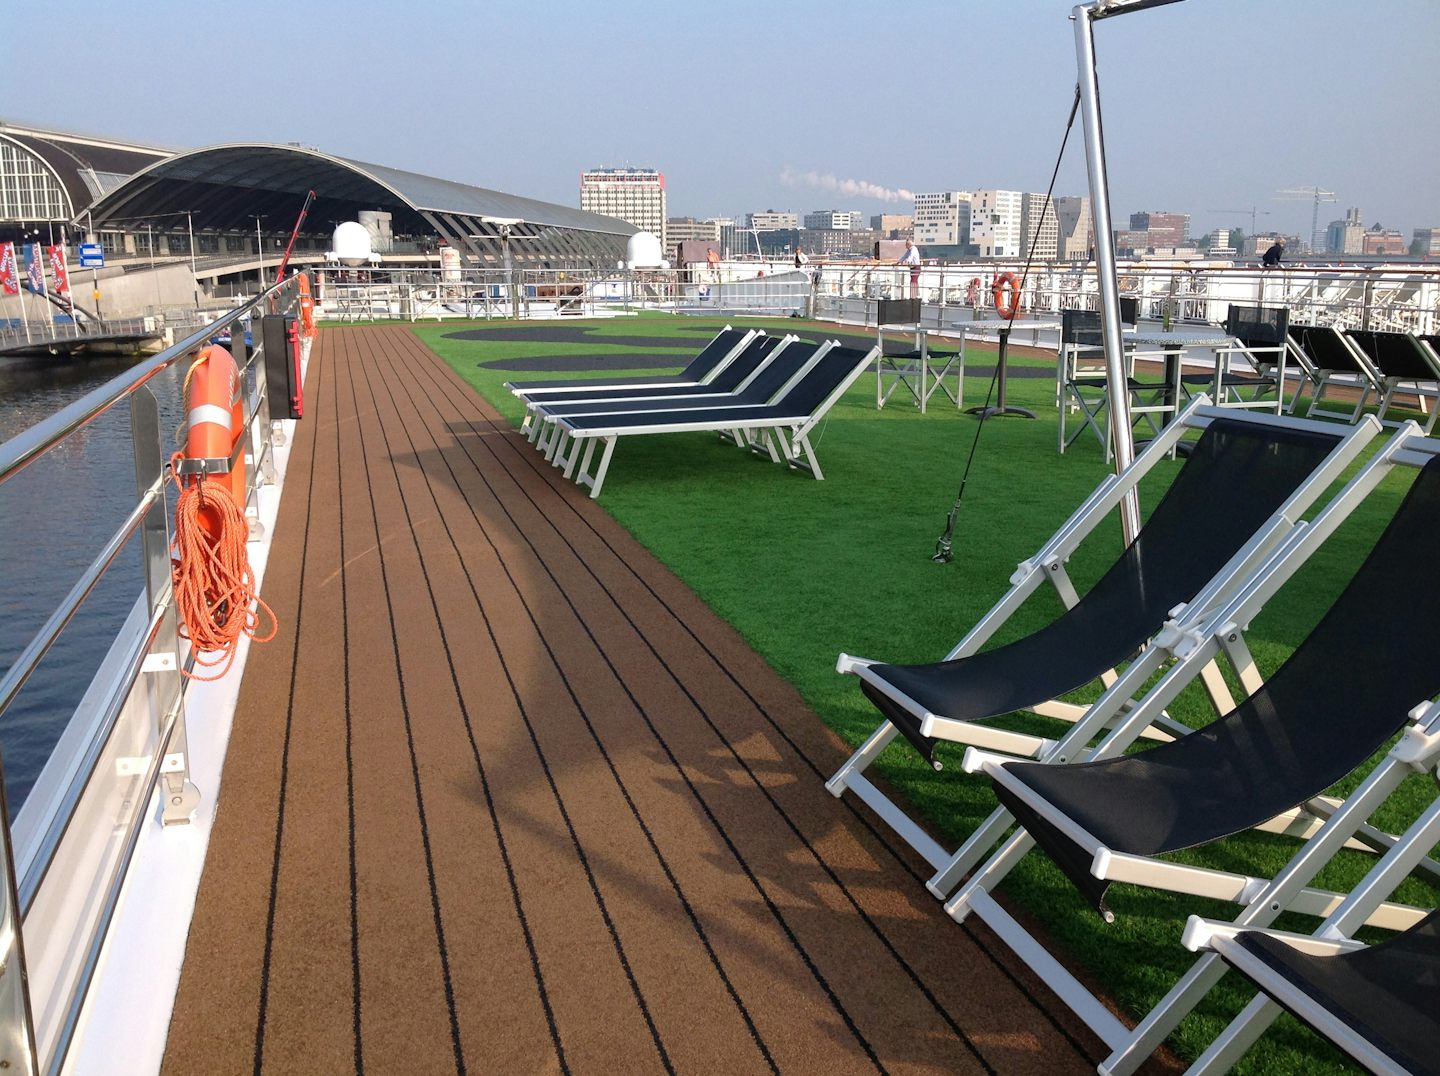 Sun deck and running track